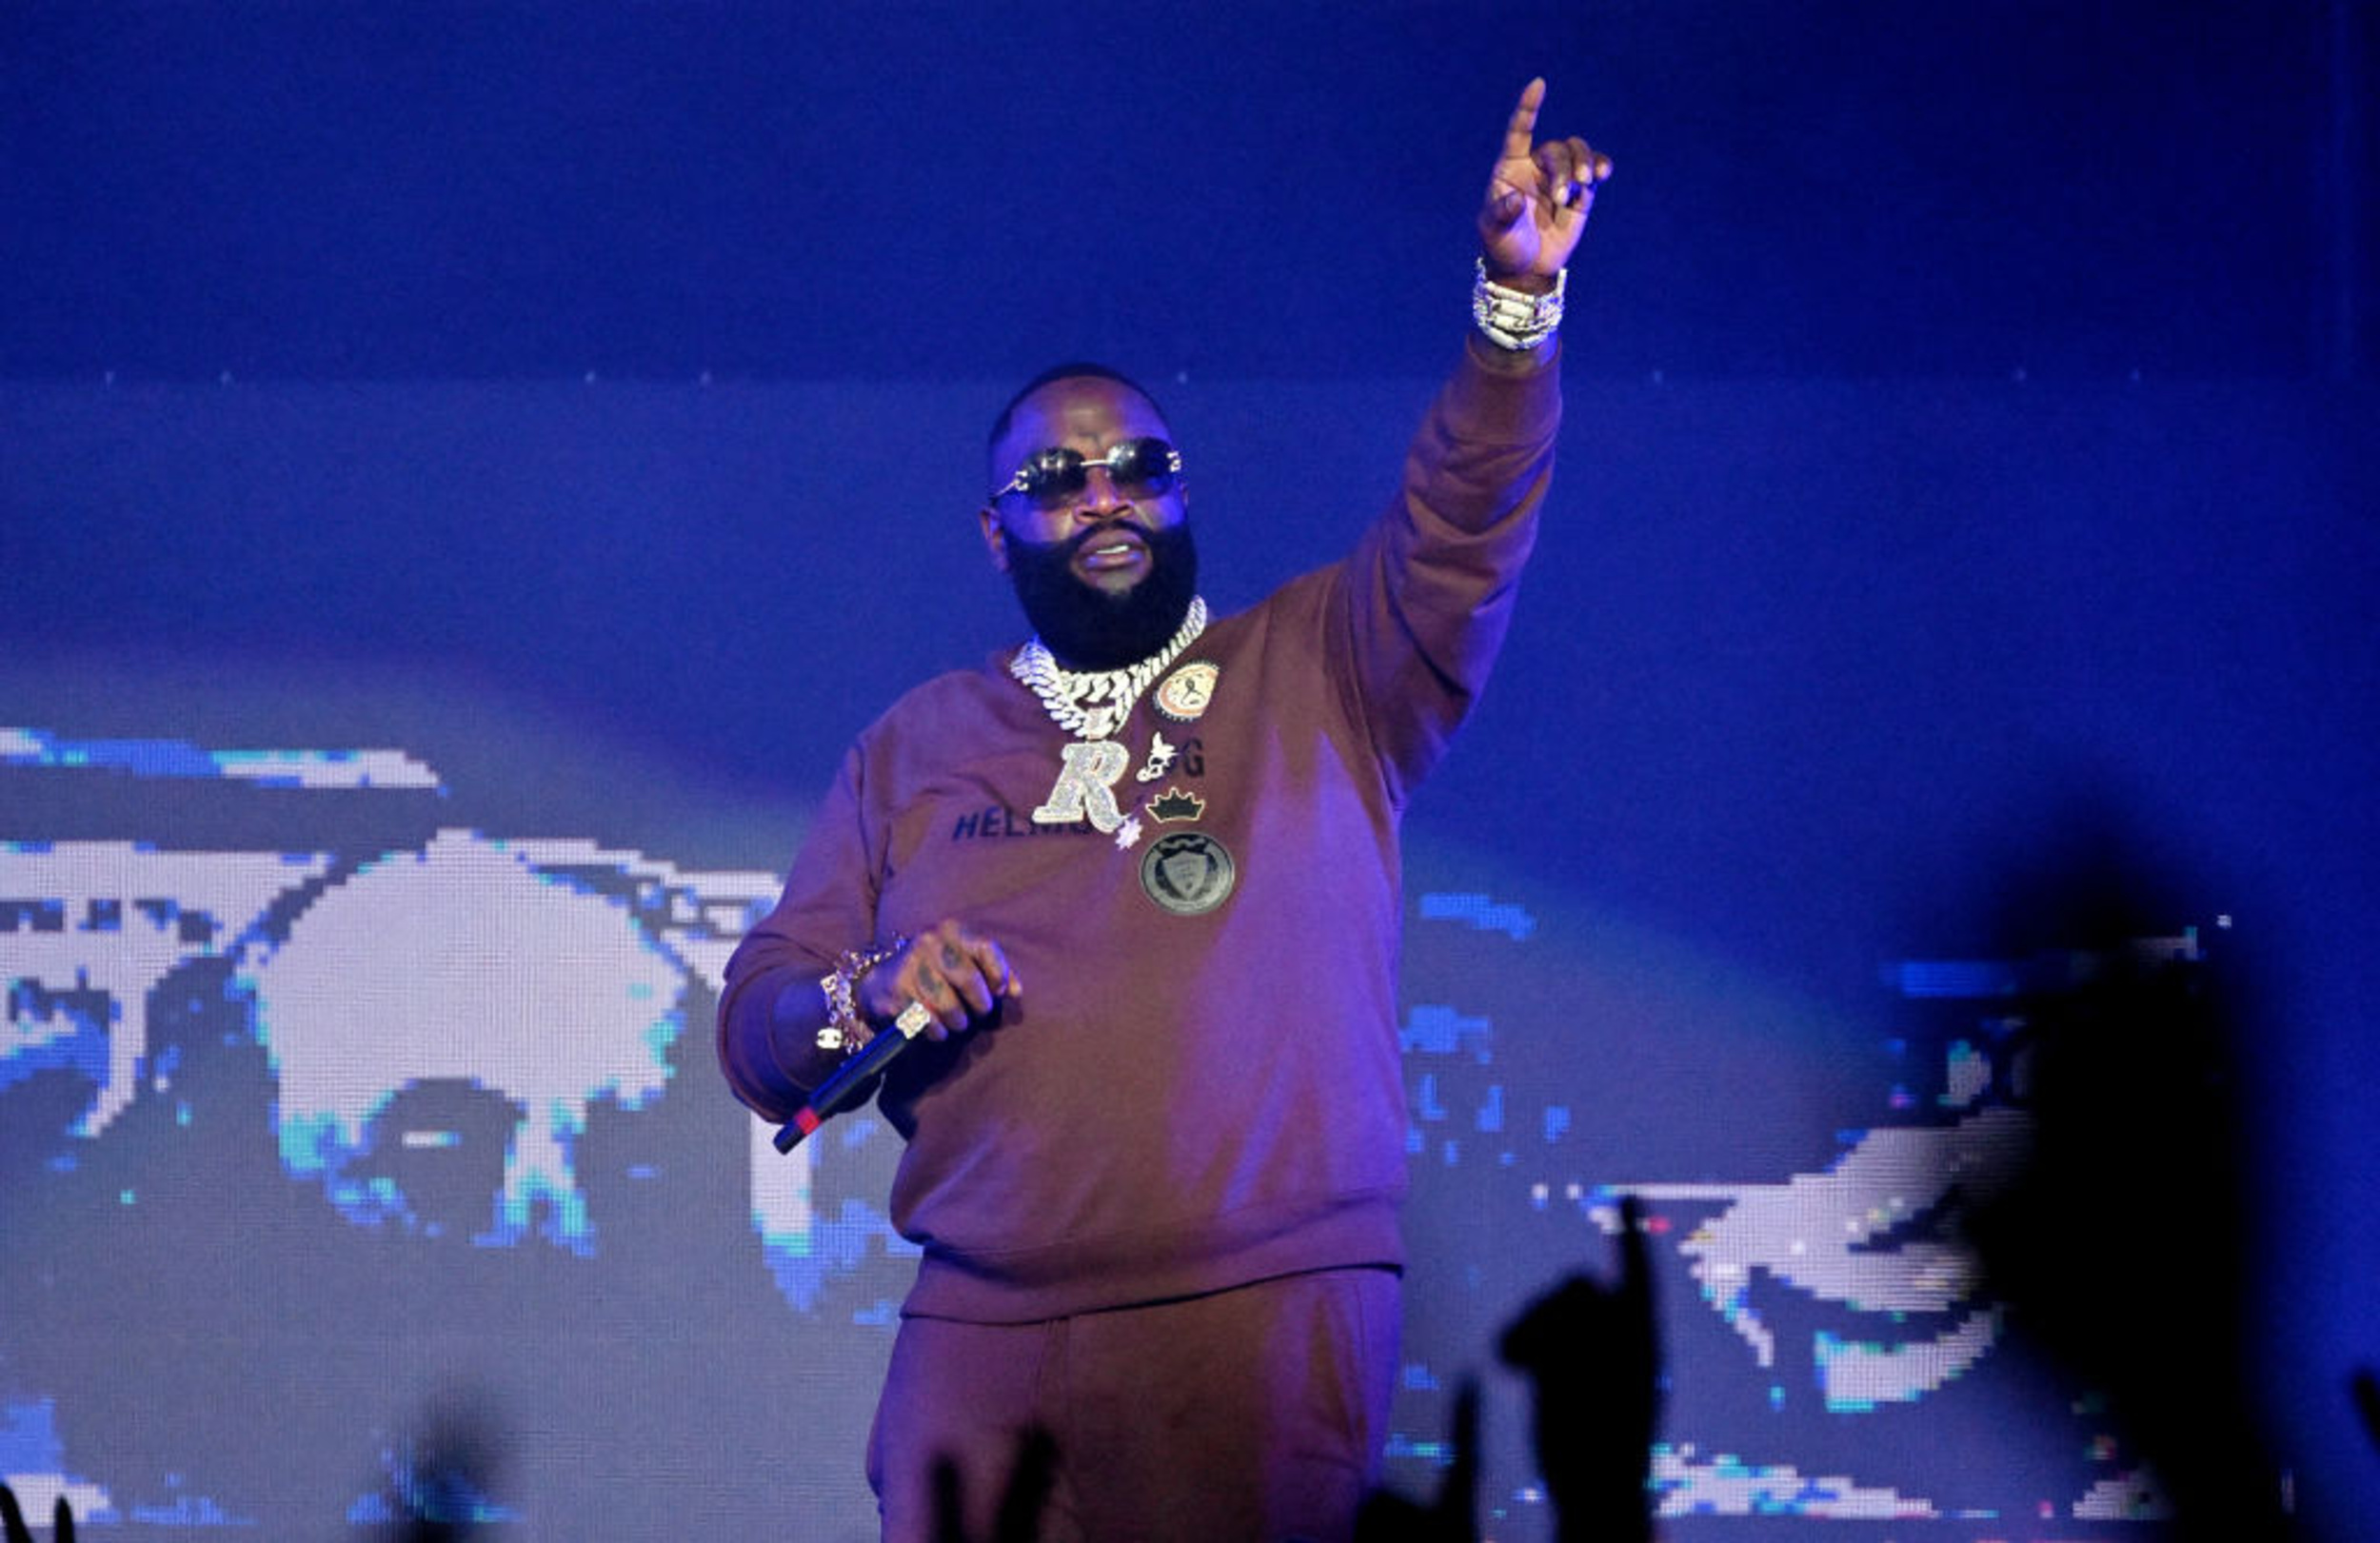 <p>Rick Ross is notorious for making music that people can drive to and envision a lavish life. He did just that when he teamed up with Drake and Chrisette Michele on their 2010 collaboration <a href="https://www.youtube.com/watch?v=a35rNEBNiO4" rel="noopener noreferrer">“Aston Martin Music.”</a> As Michele sings on the hook, “Riding to the music, this is how we do it all night / Breezing down the freeway just me and my baby, in our ride.” </p><p>You may also like: <a href='https://www.yardbarker.com/entertainment/articles/the_most_compelling_fictional_slackers_in_movie_history_120623/s1__38521821'>The most compelling fictional slackers in movie history</a></p>